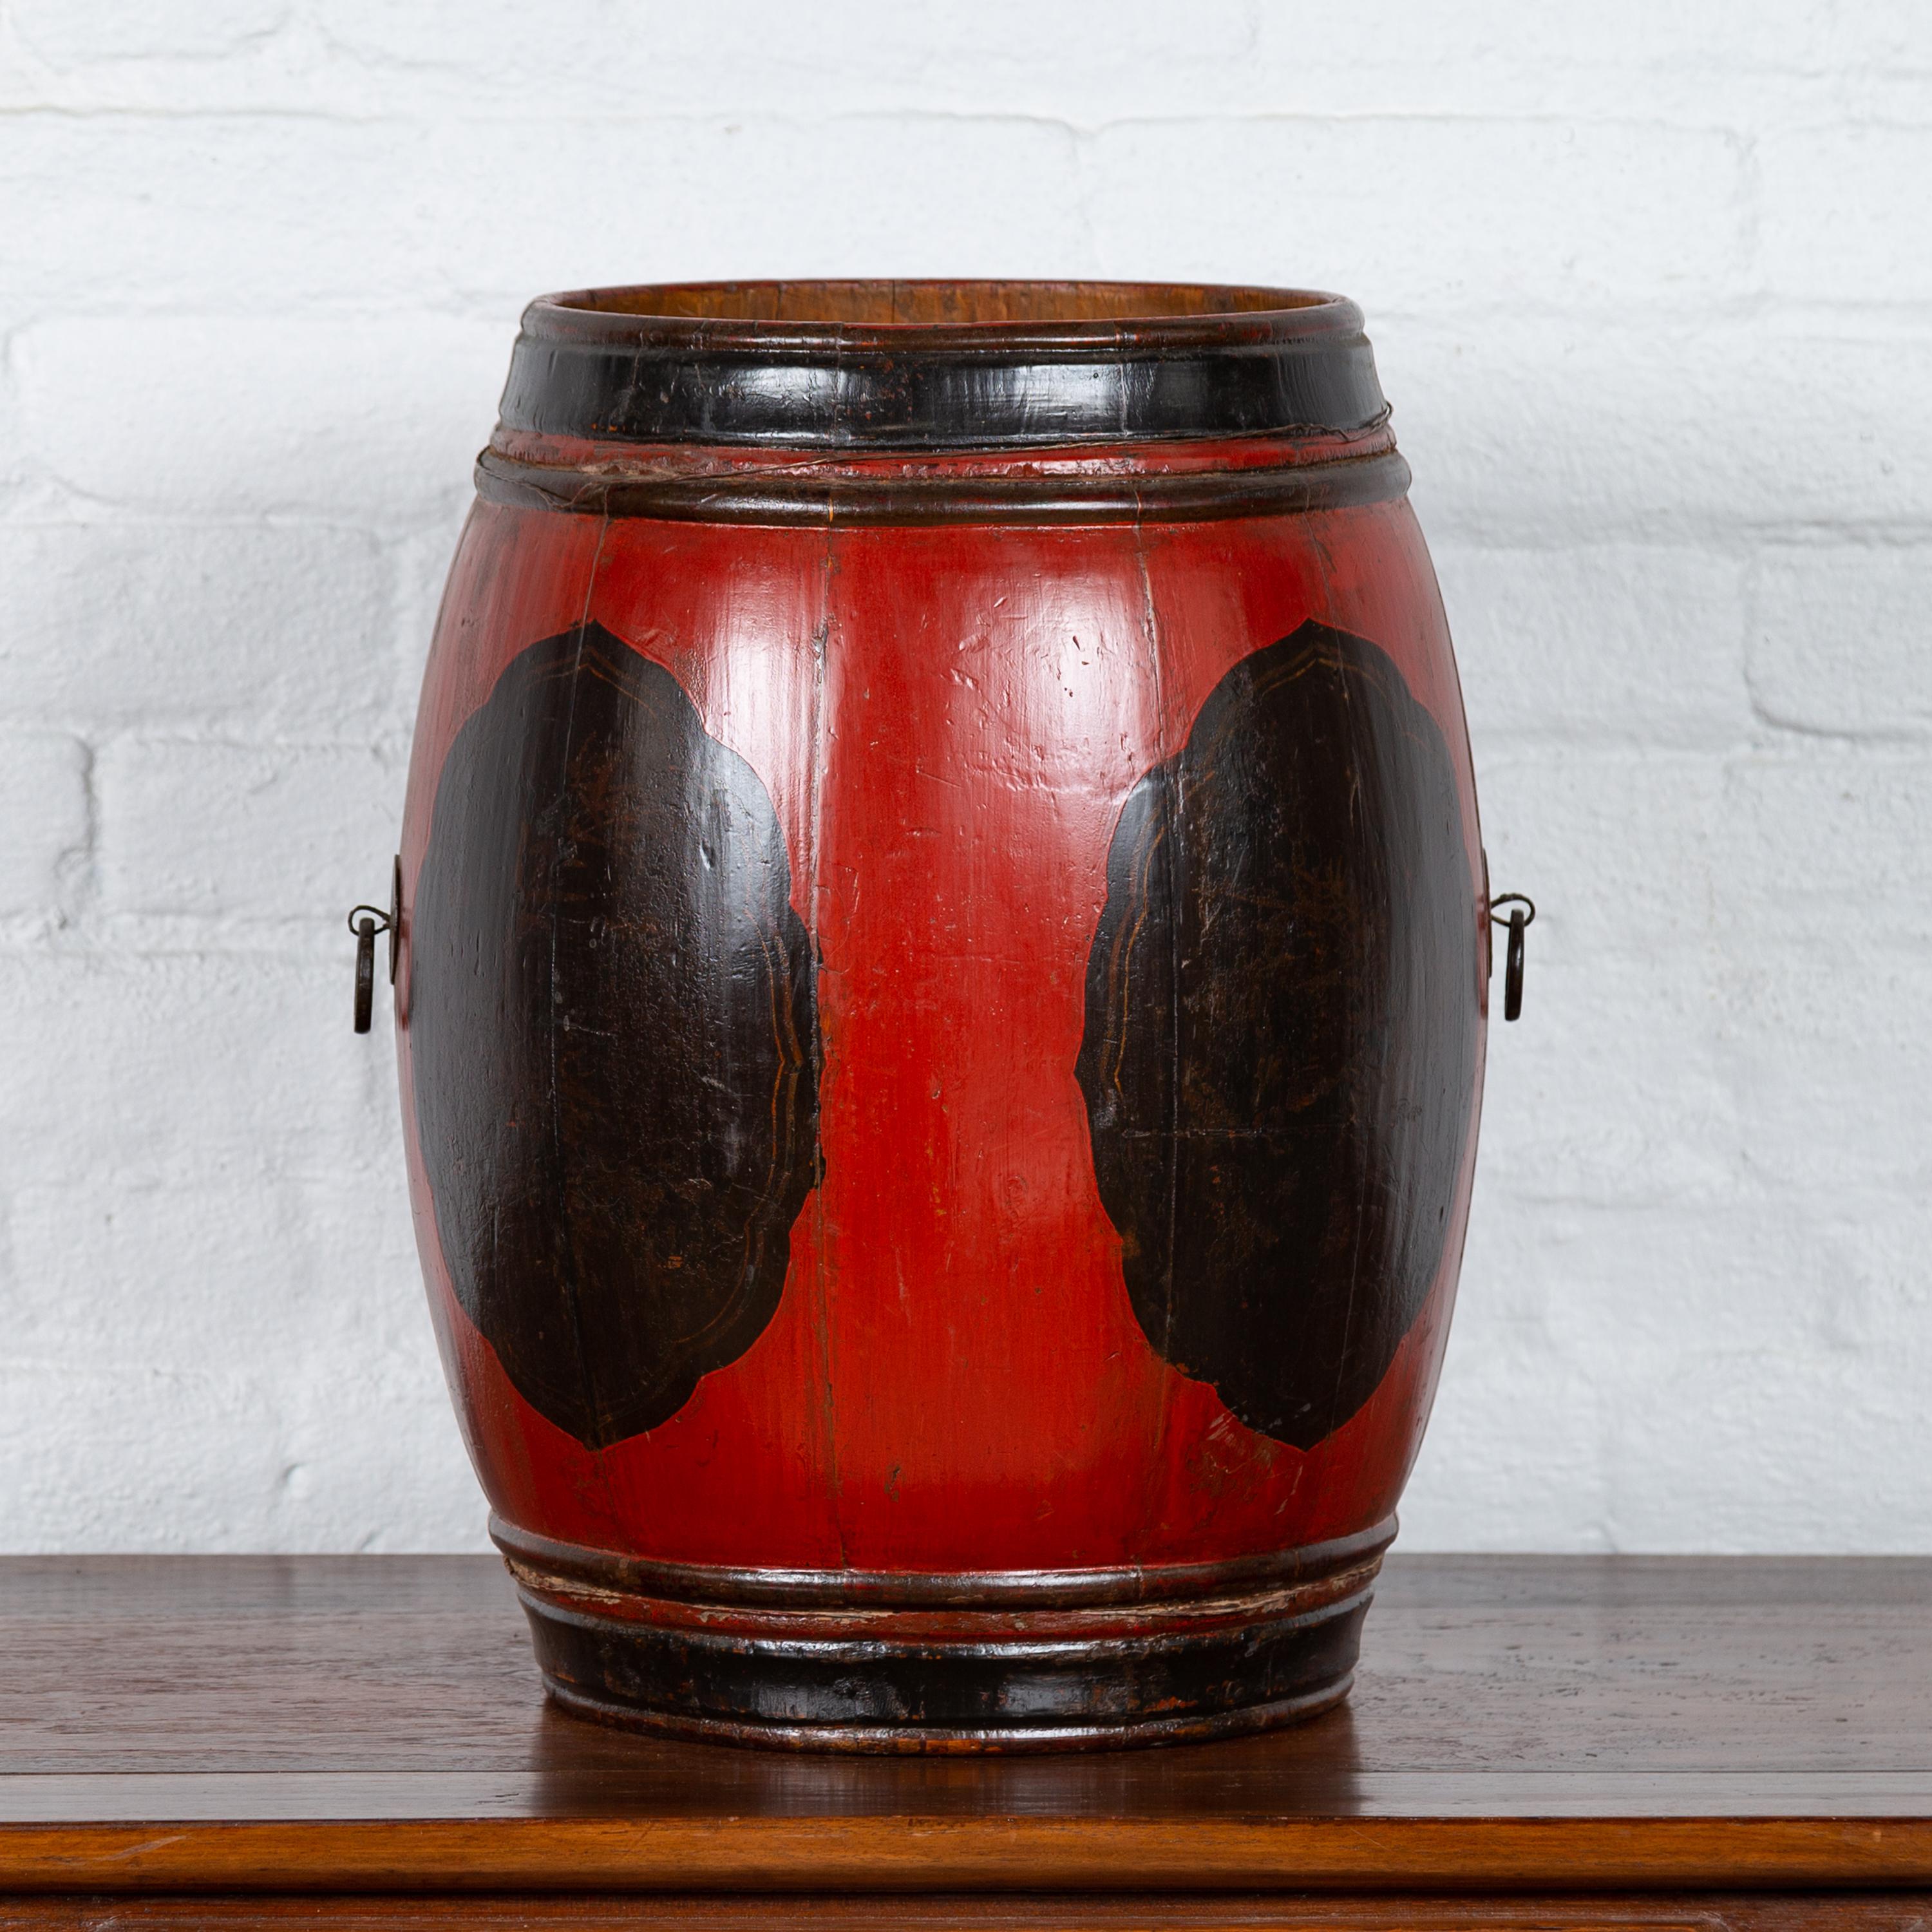 A small vintage Chinese wooden barrel planter from the mid-20th century with red and black lacquer. Born in China during the mid-century period, this small barrel presents a nice contrast of colors. The black molded edges of the top and bottom frame